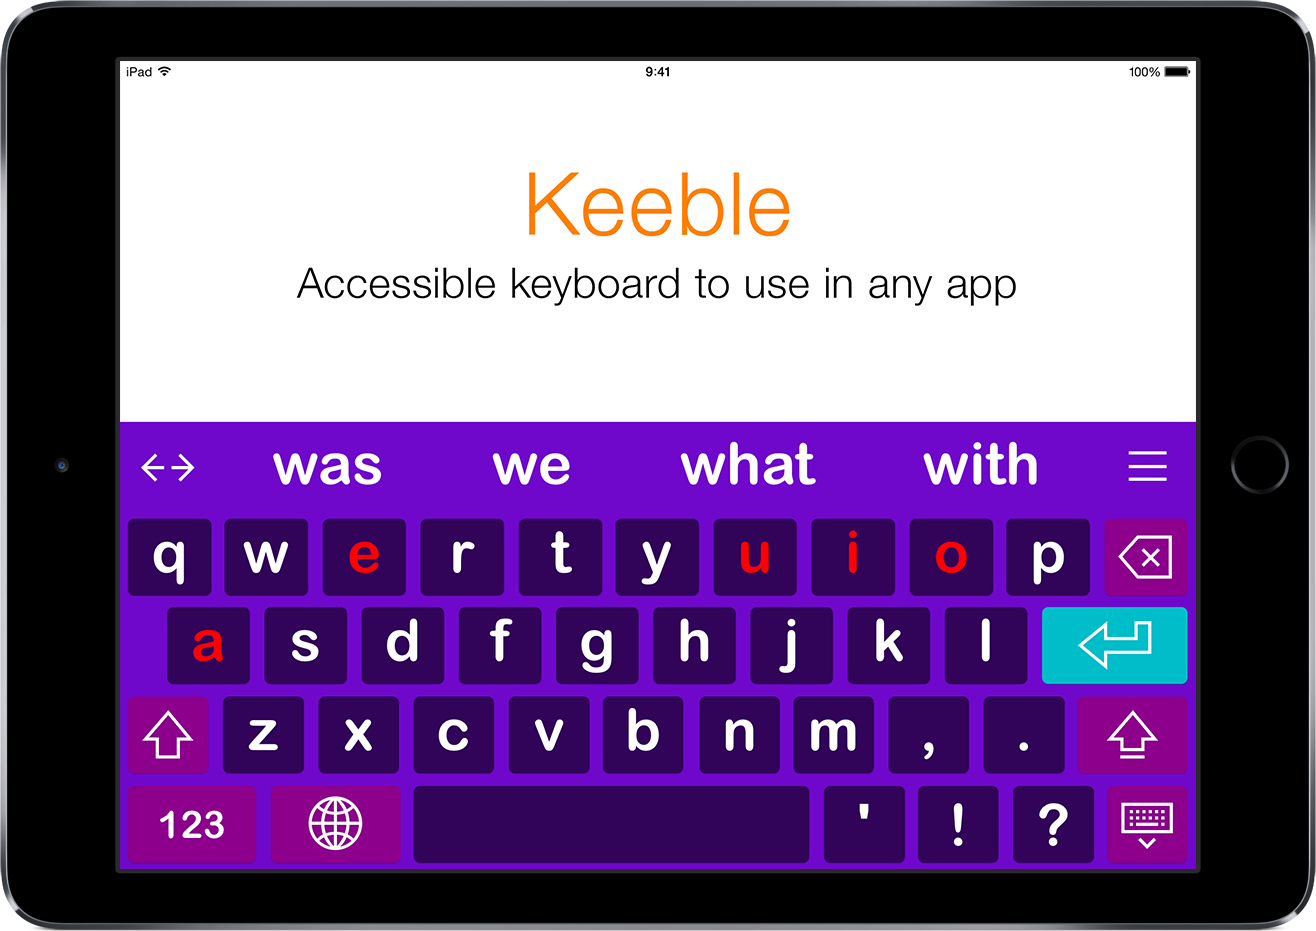 AssistiveWare's Keeble 3.0 makes typing more accessible on iOS Image